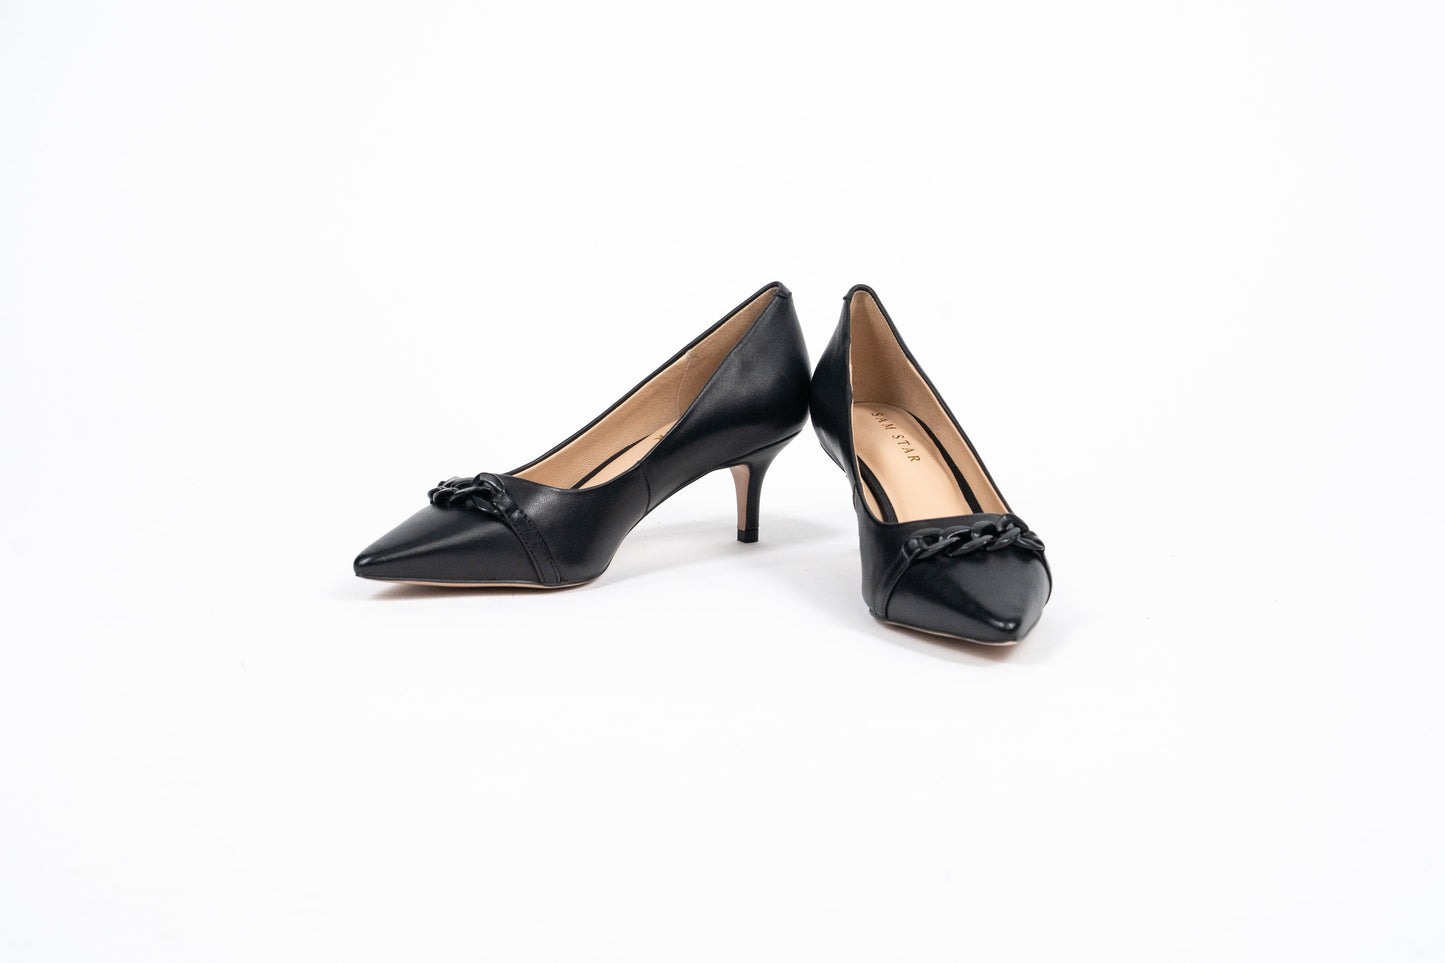 SS23011 Leather court shoes with chain detail - Black (New Arrival) ladies shoes Sam Star shoes Black 36/3 